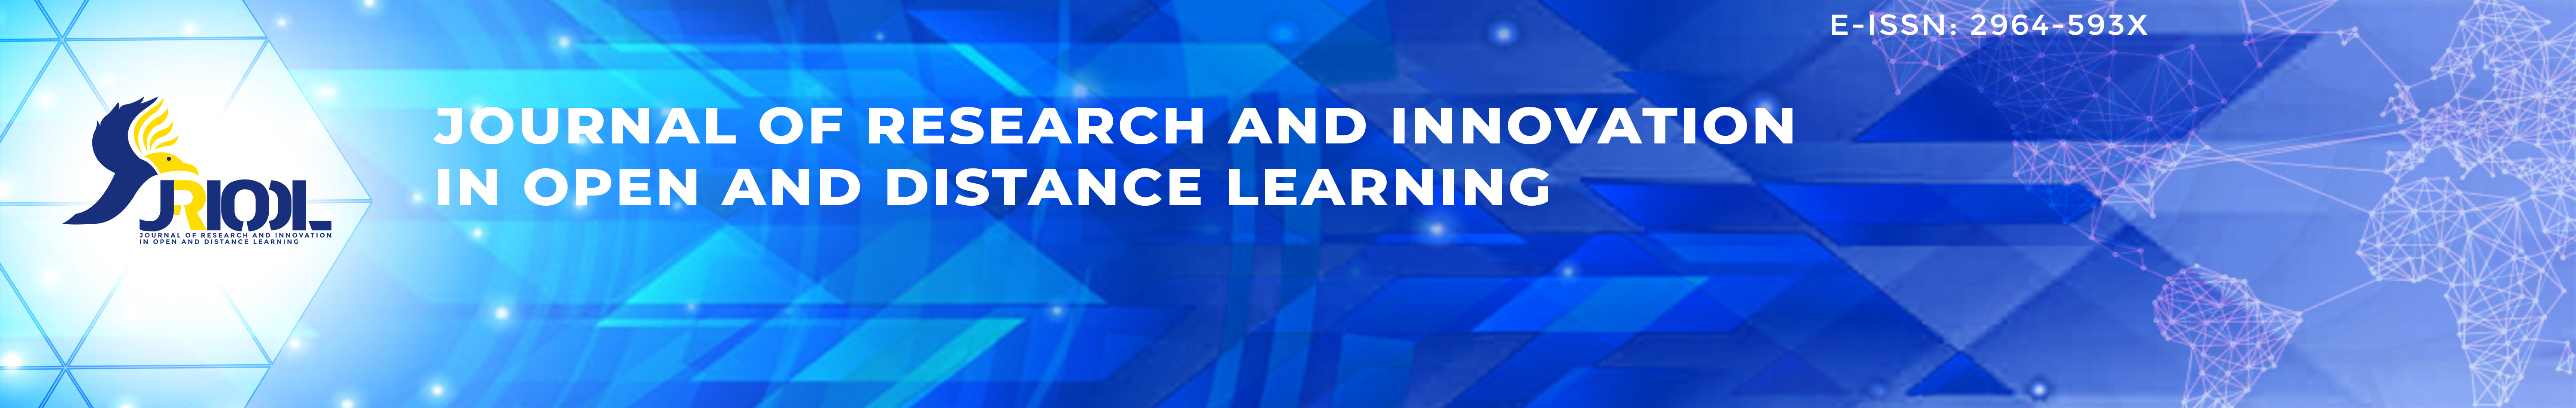 Journal of Research and Innovation In Open and Distance Learning